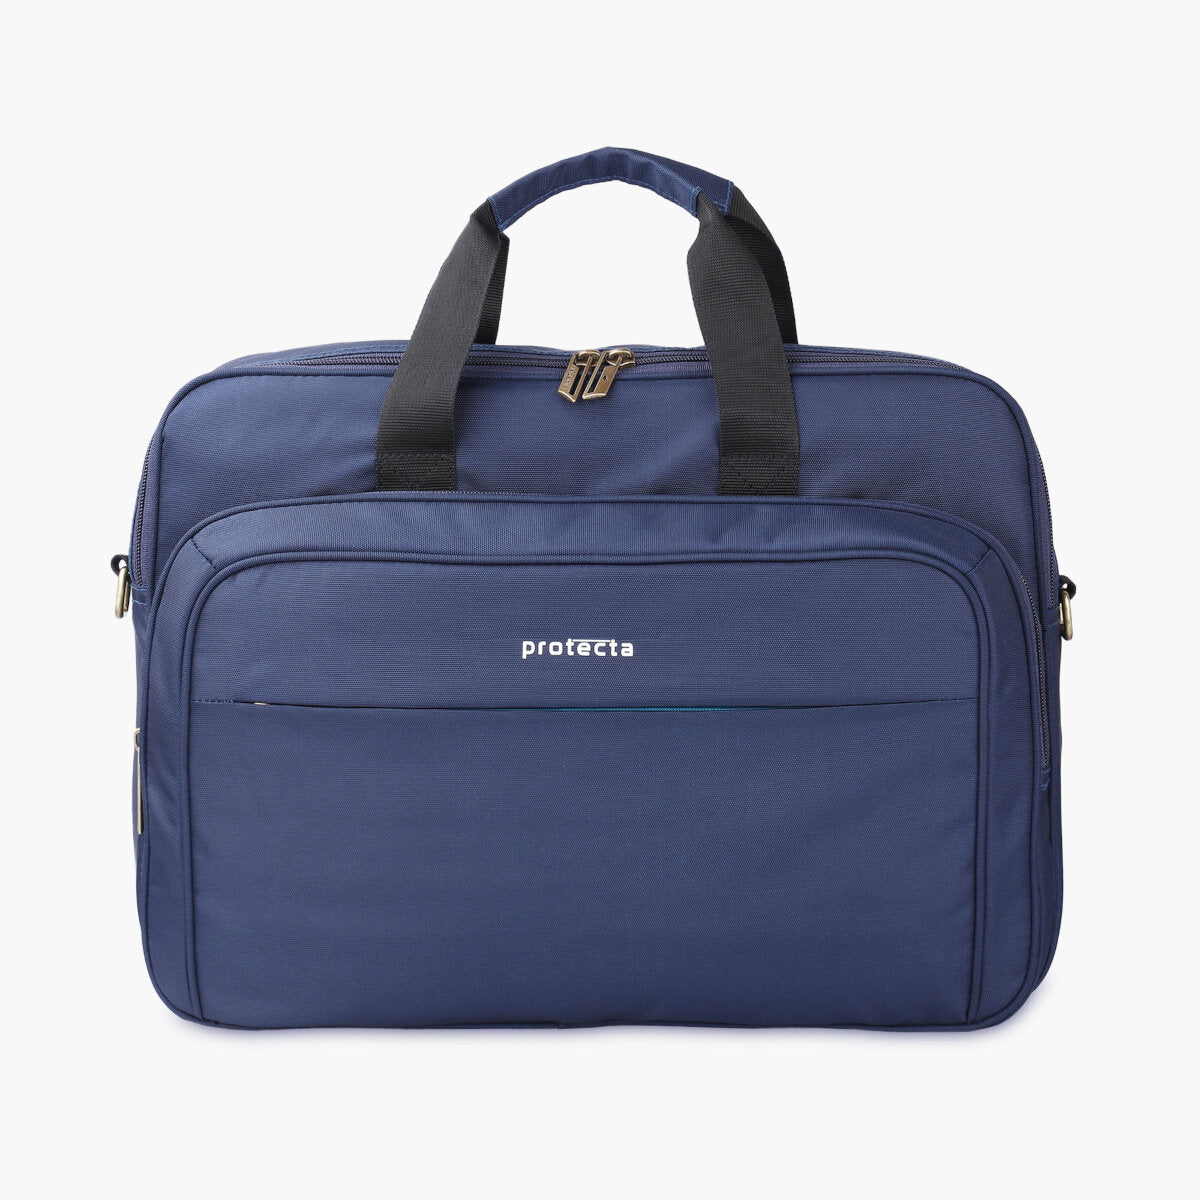 Navy-Blue, Protecta Staunch Ally Travel &amp; Offfice Laptop Bag-Main